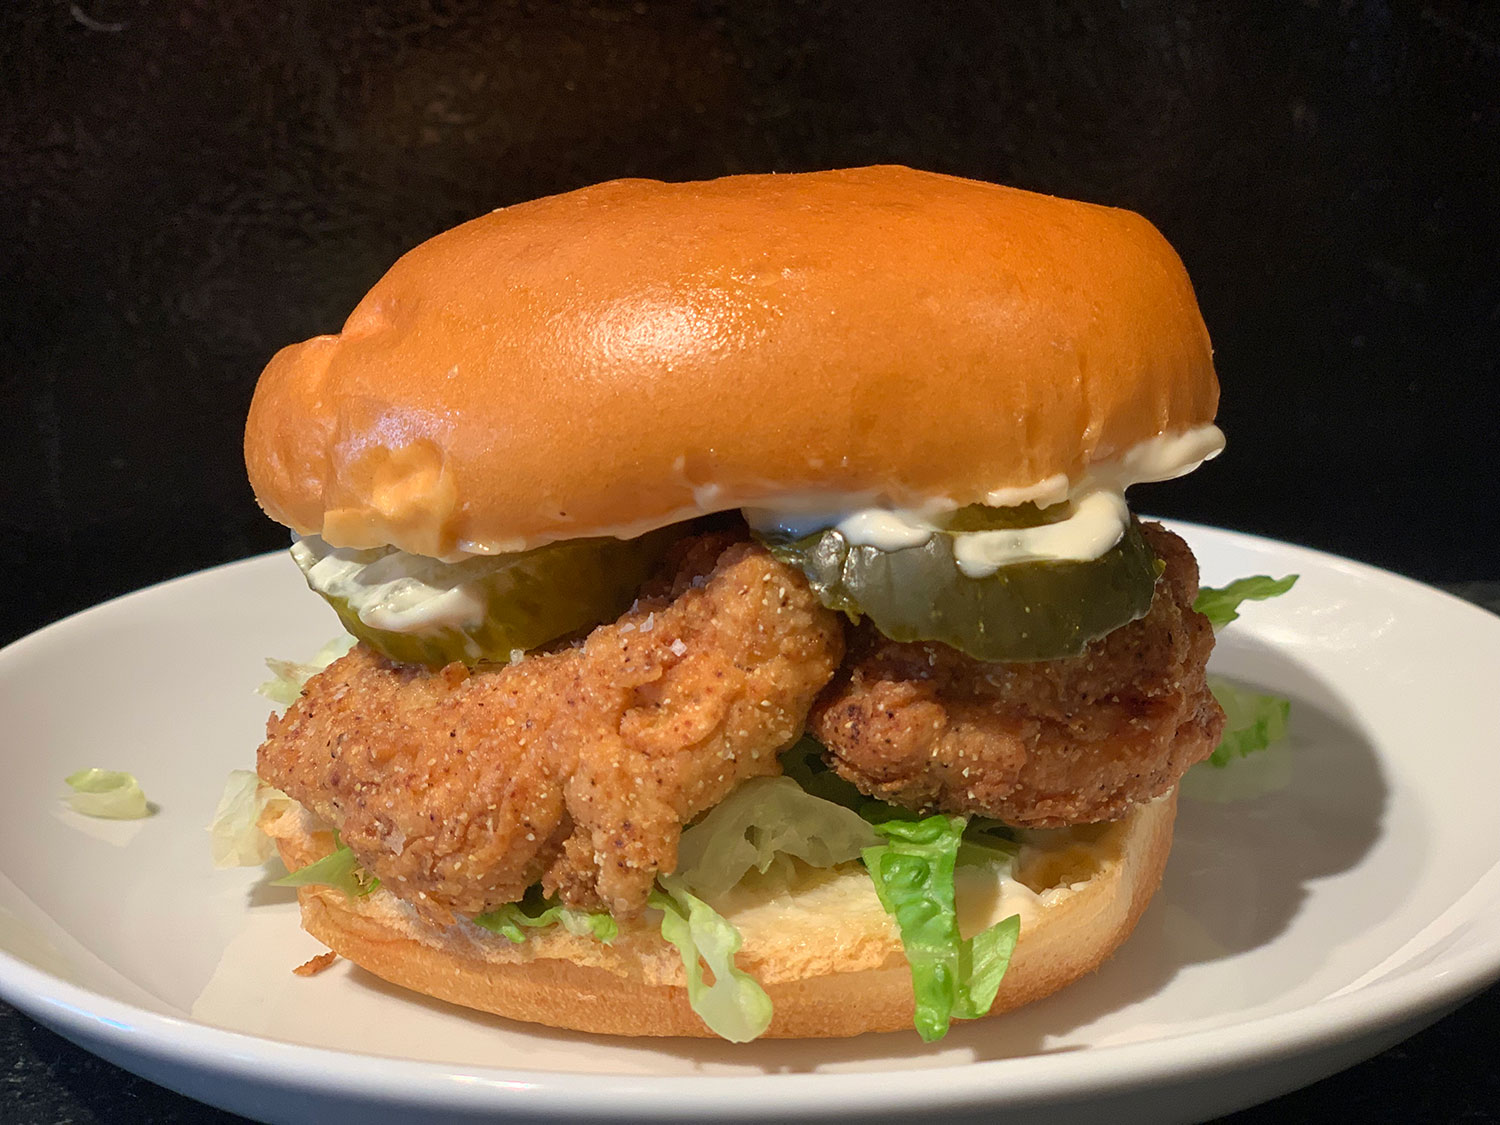 This fried pheasant sandwich might make you forget about Popeyes and Chick-fil-A